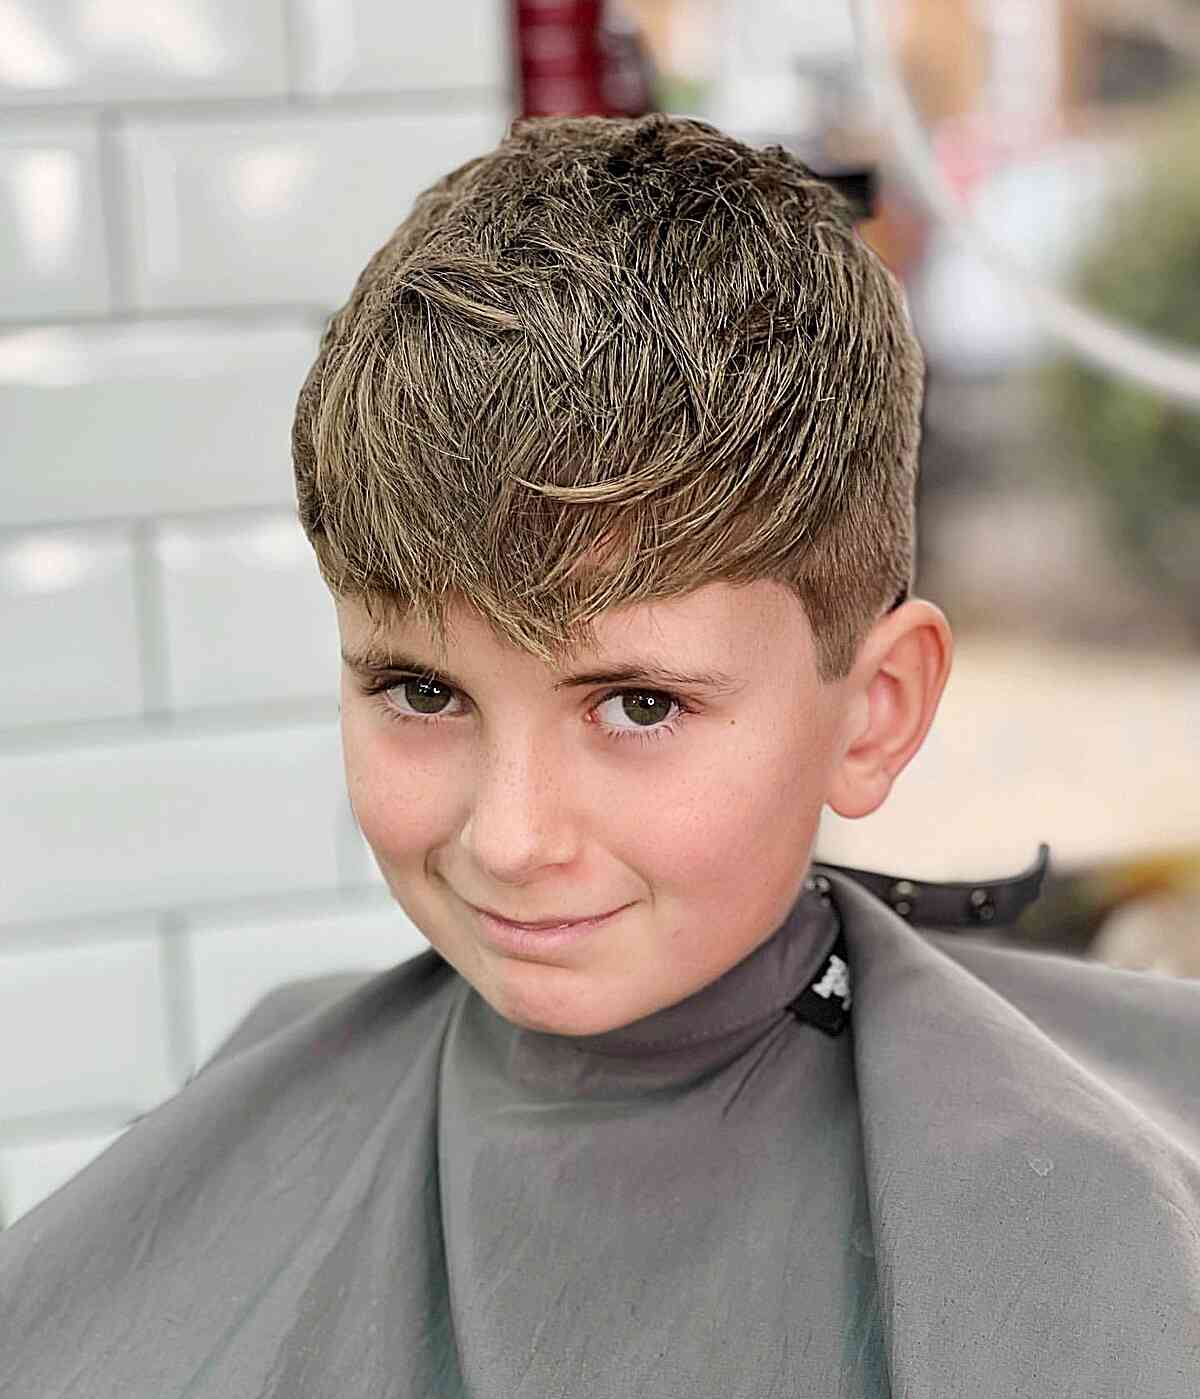 Brushed Forward with a Slight Fade for Little Guys with Medium-Length Hair on Top